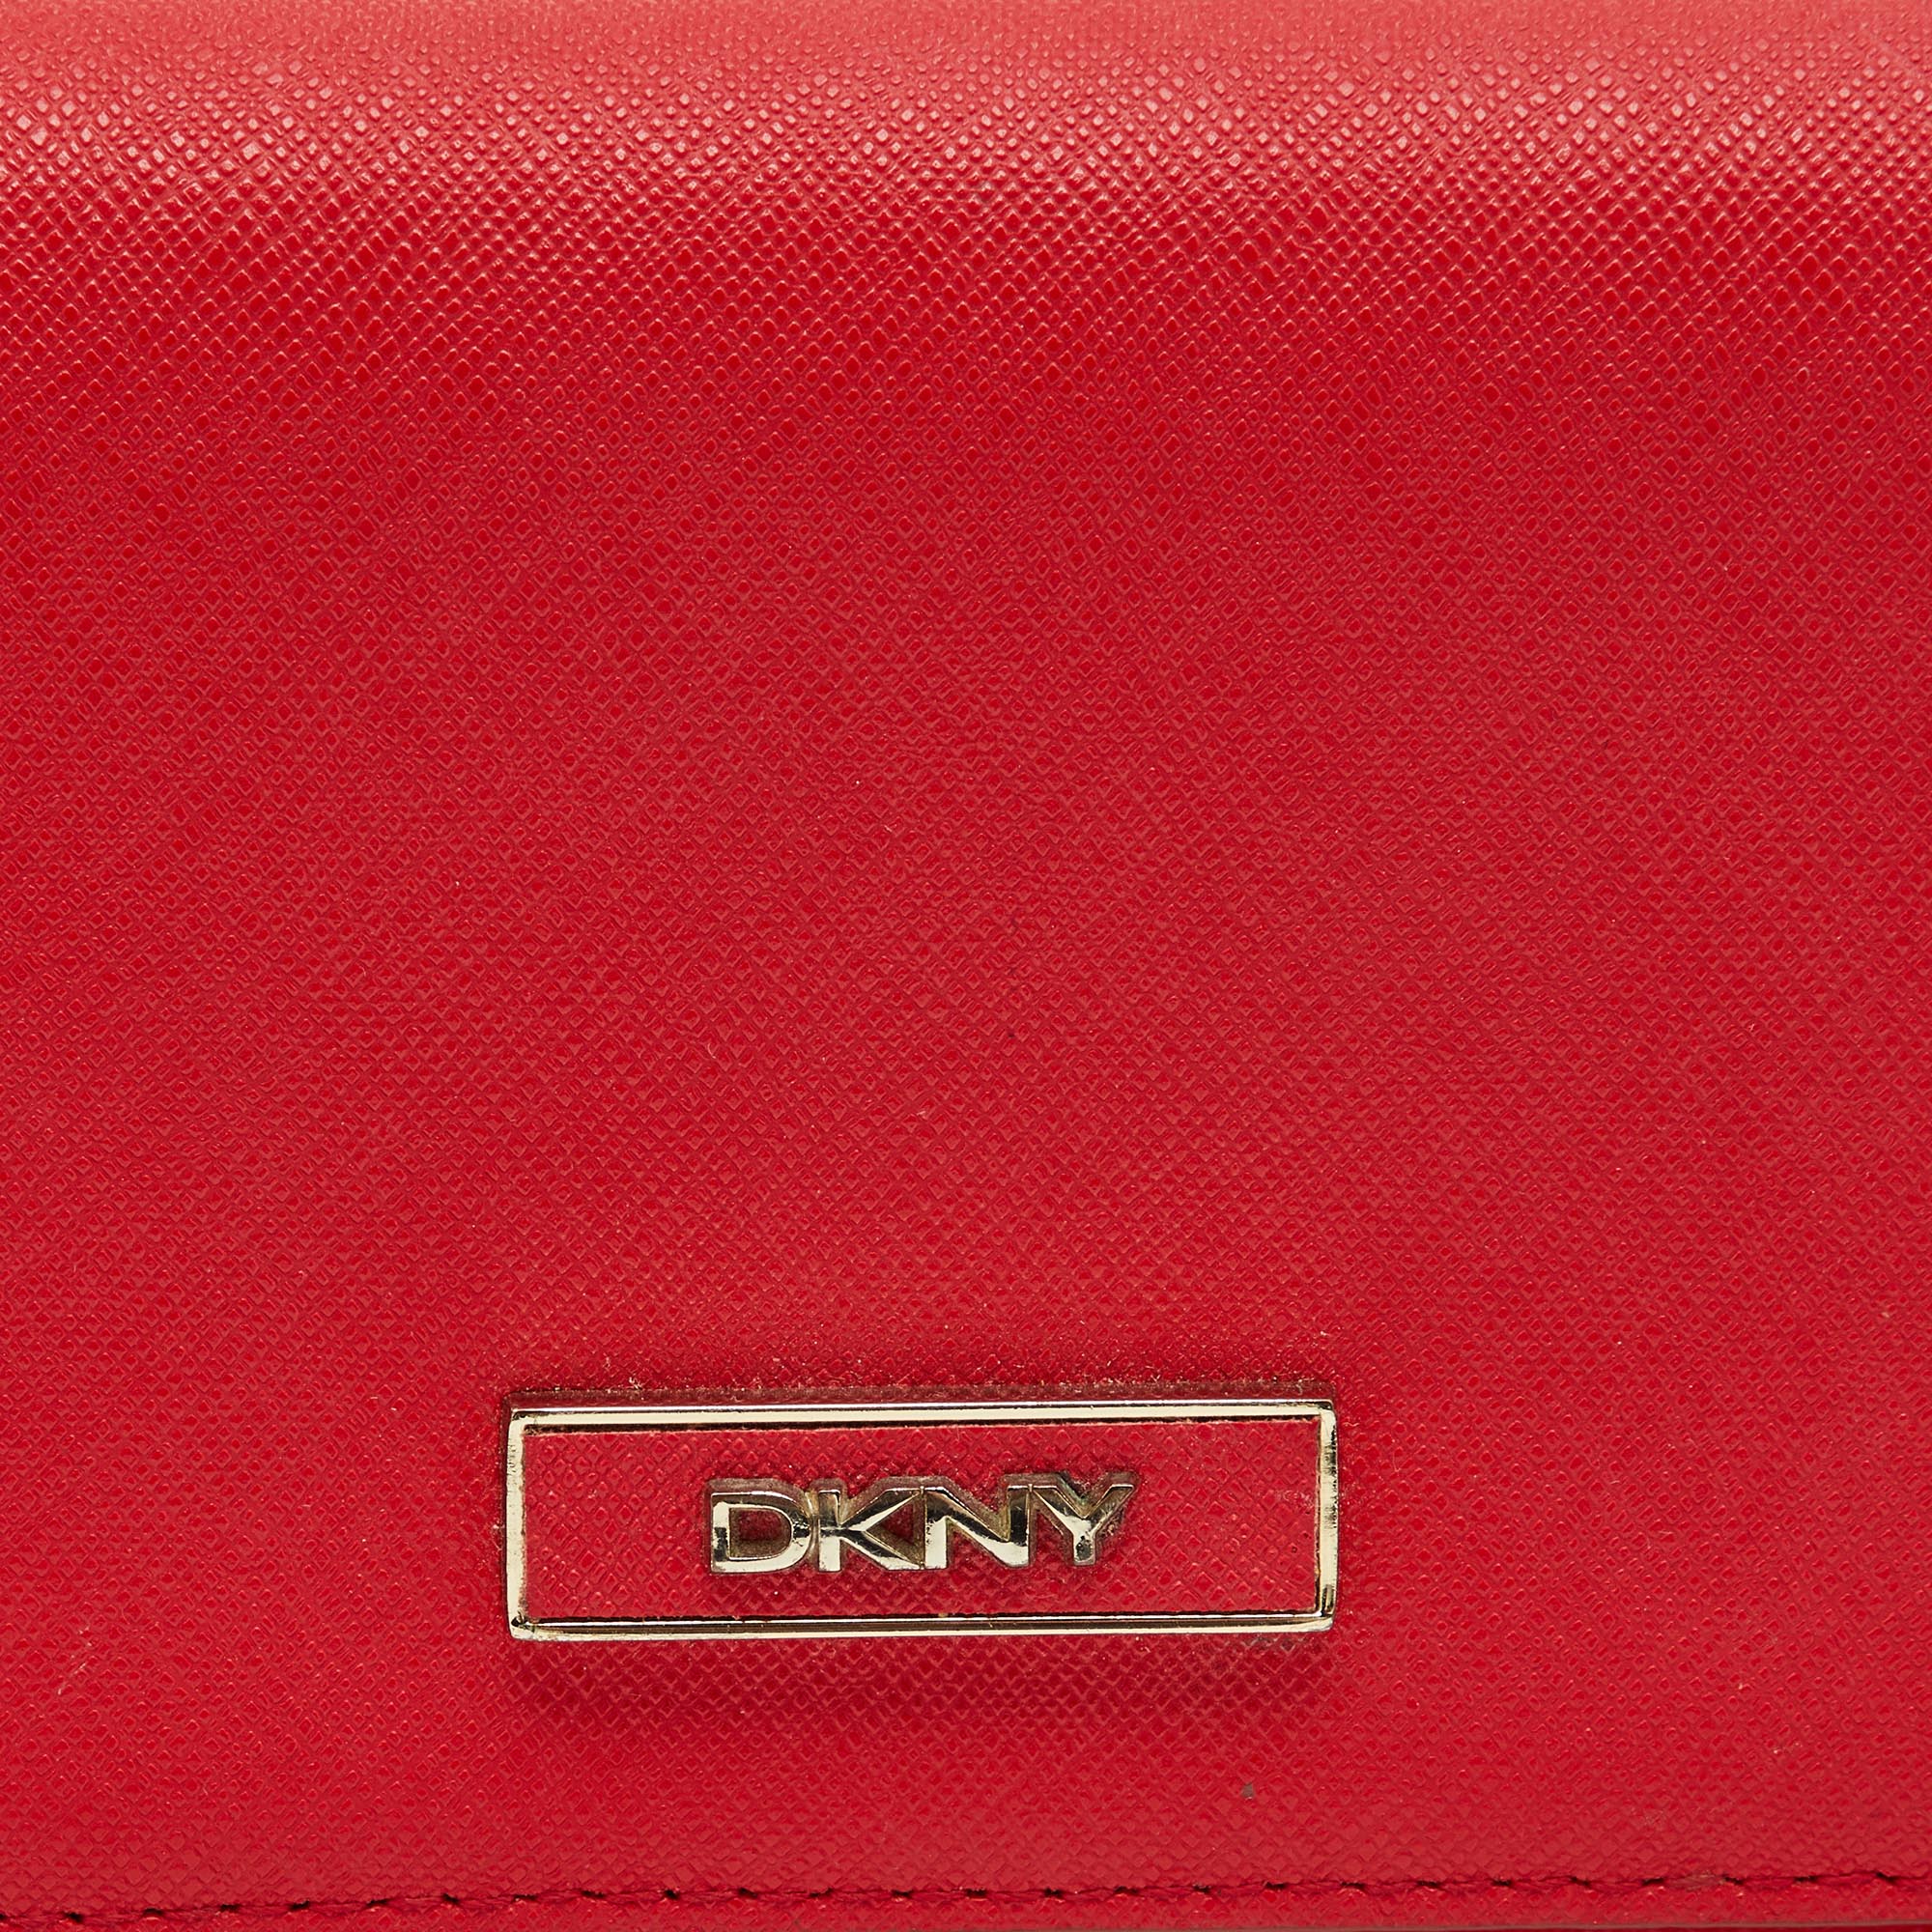 DKNY Red Leather Flap Continental Wallet